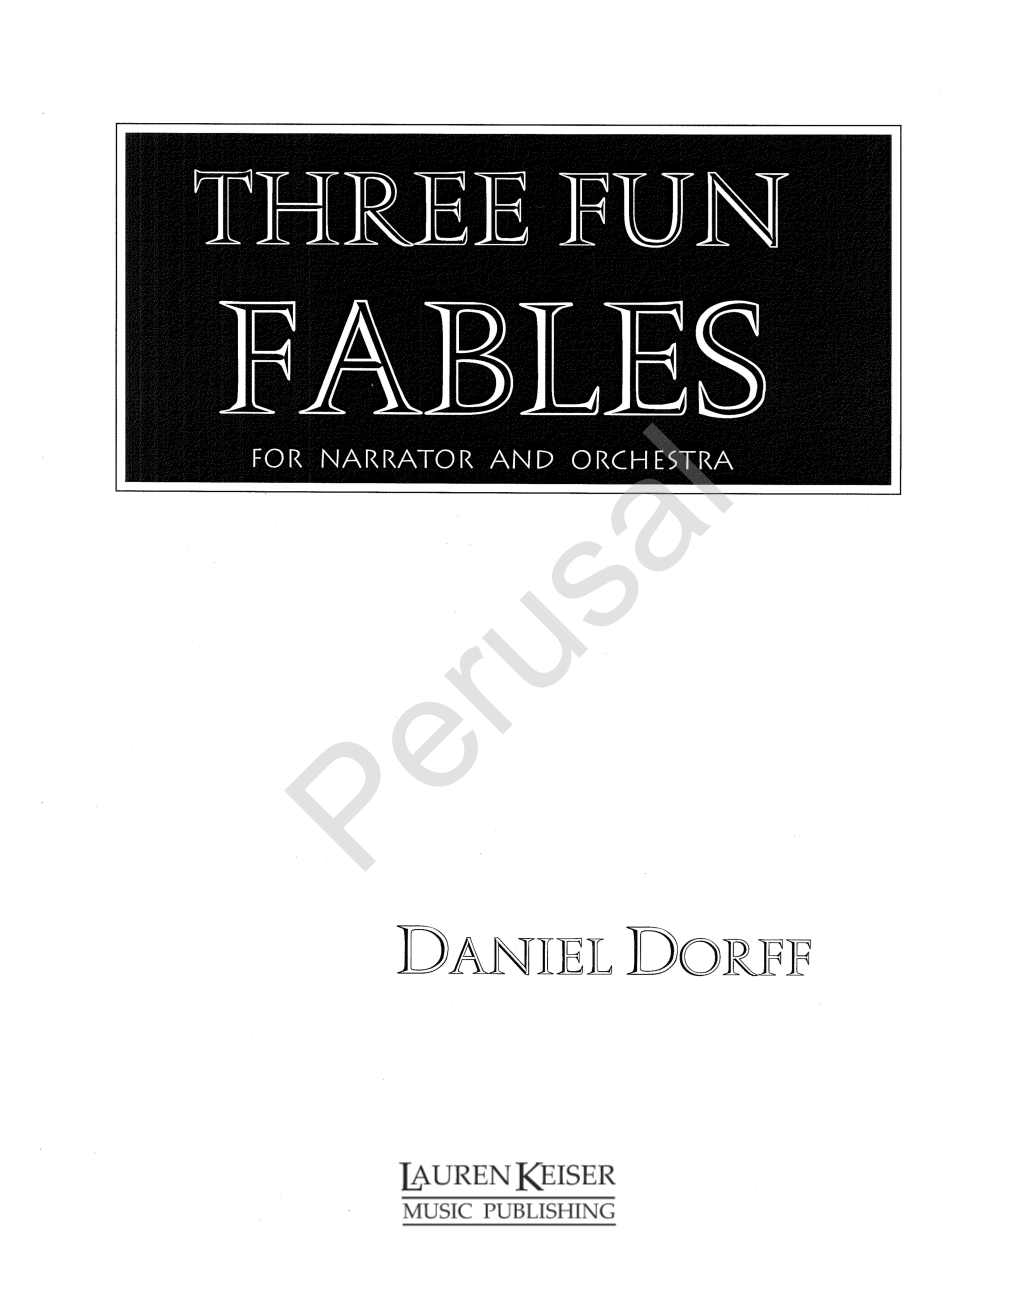 Three Fun Fables for Narrator and Orchestra